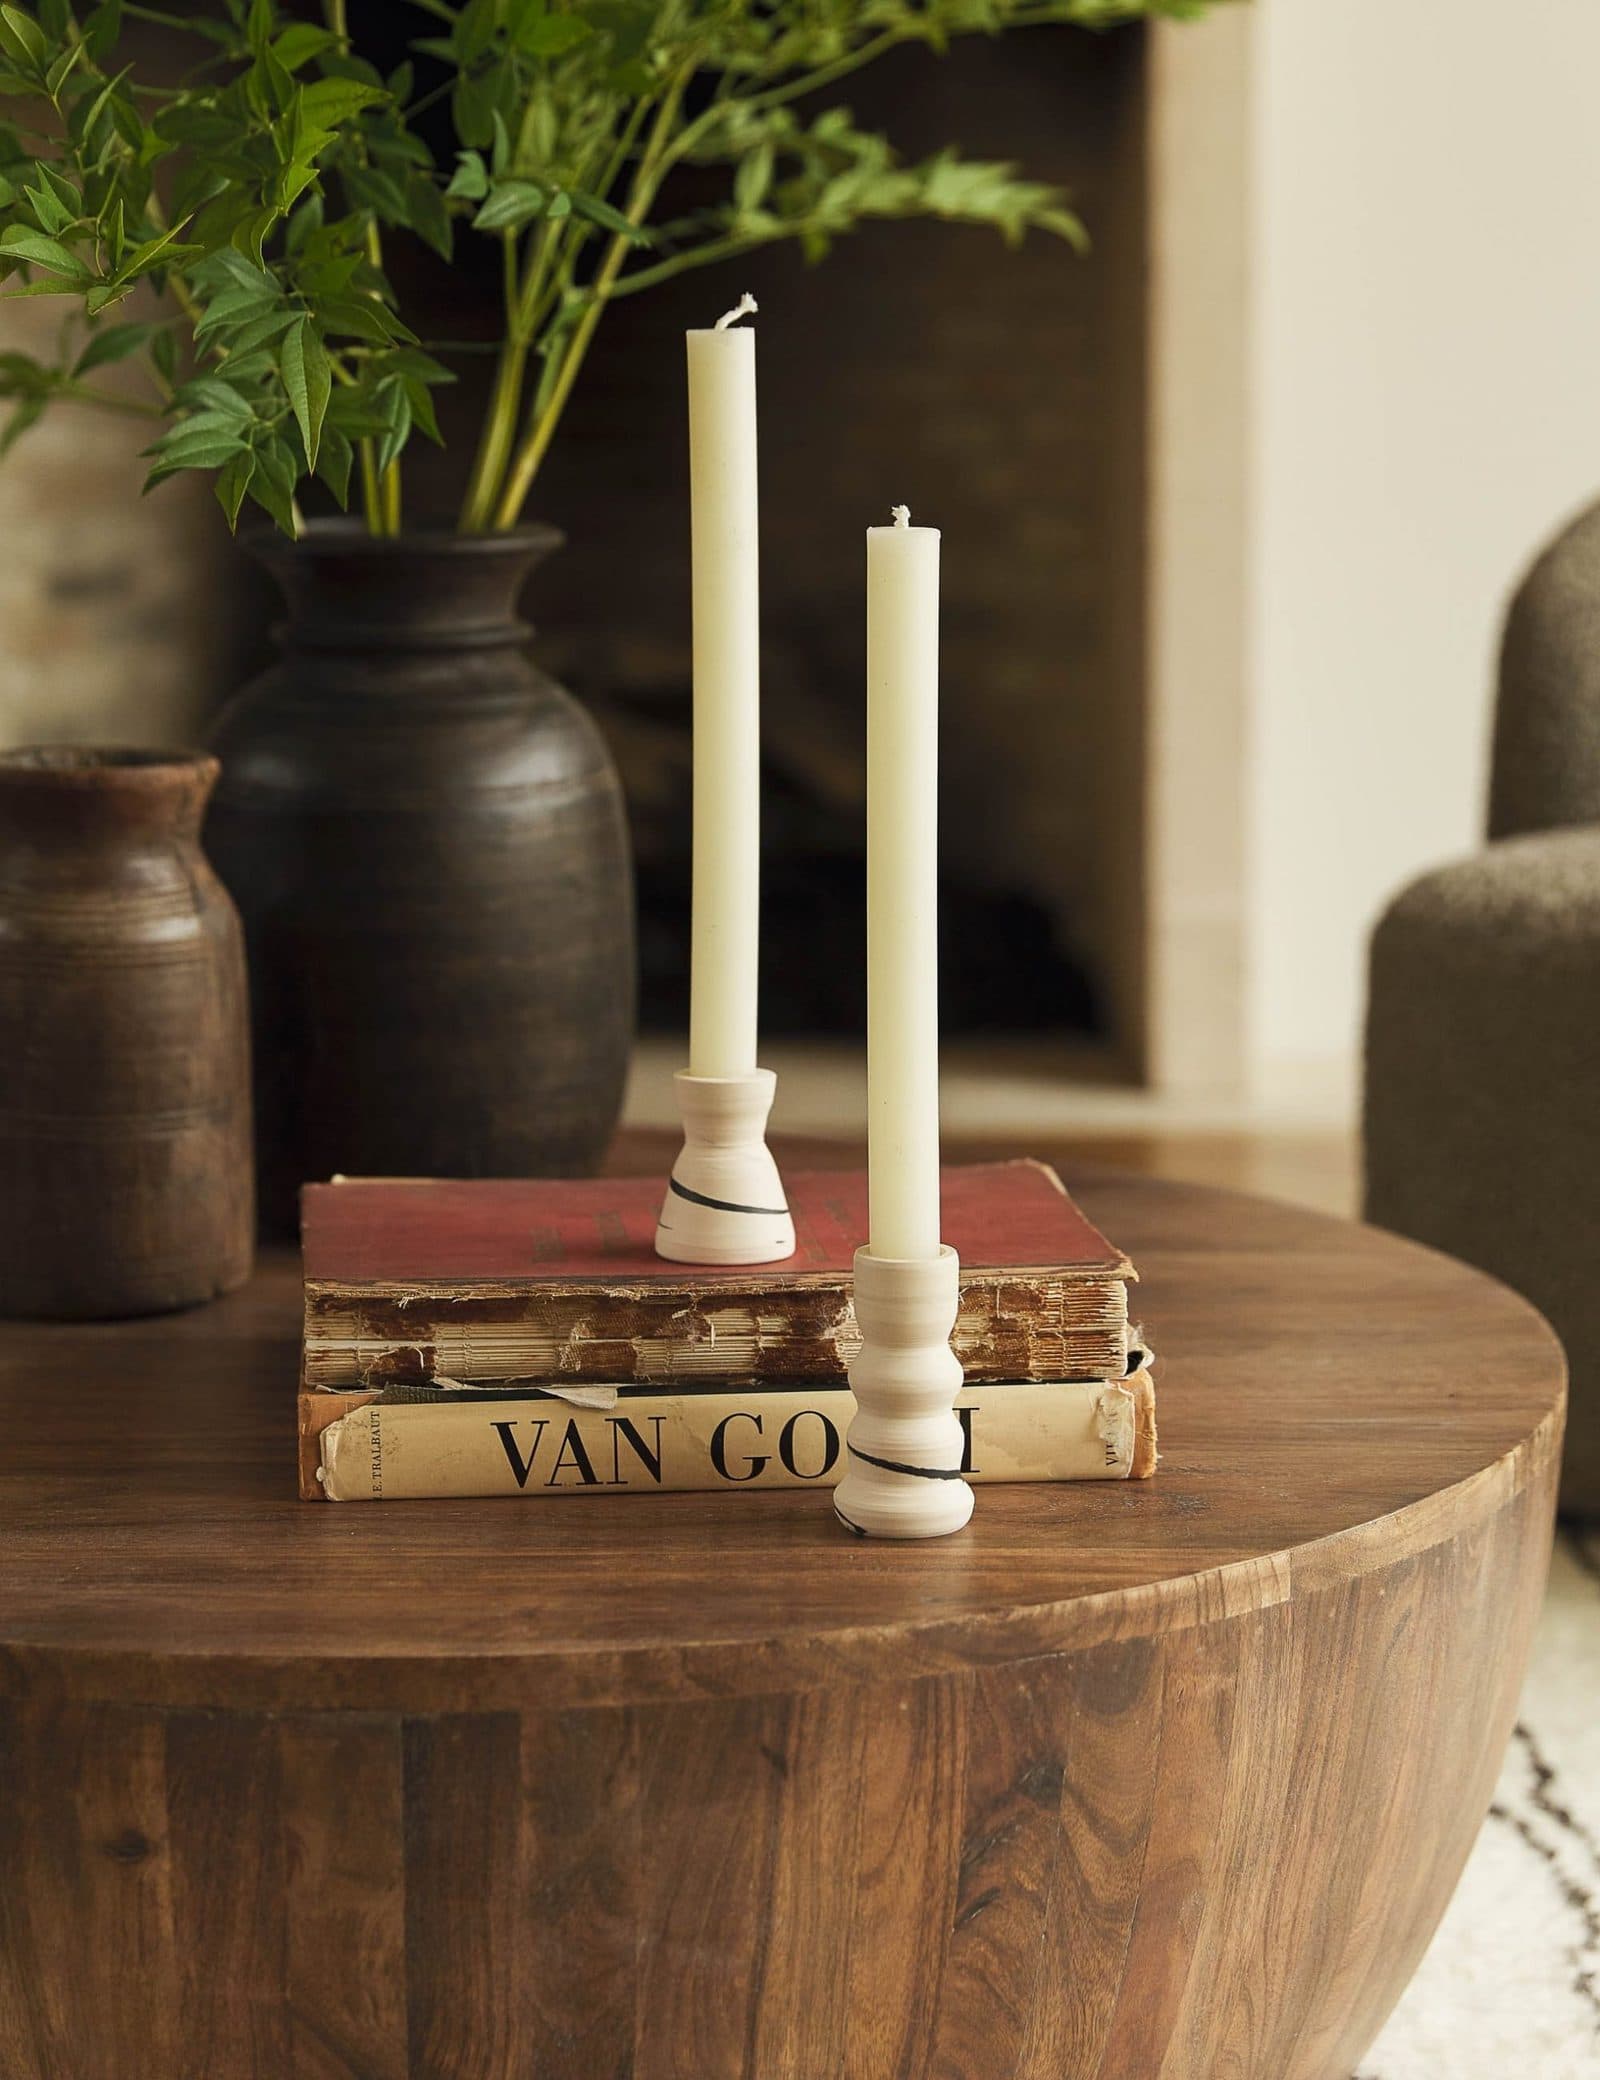 Mix Vases, Books, and Candles for a Layered Look